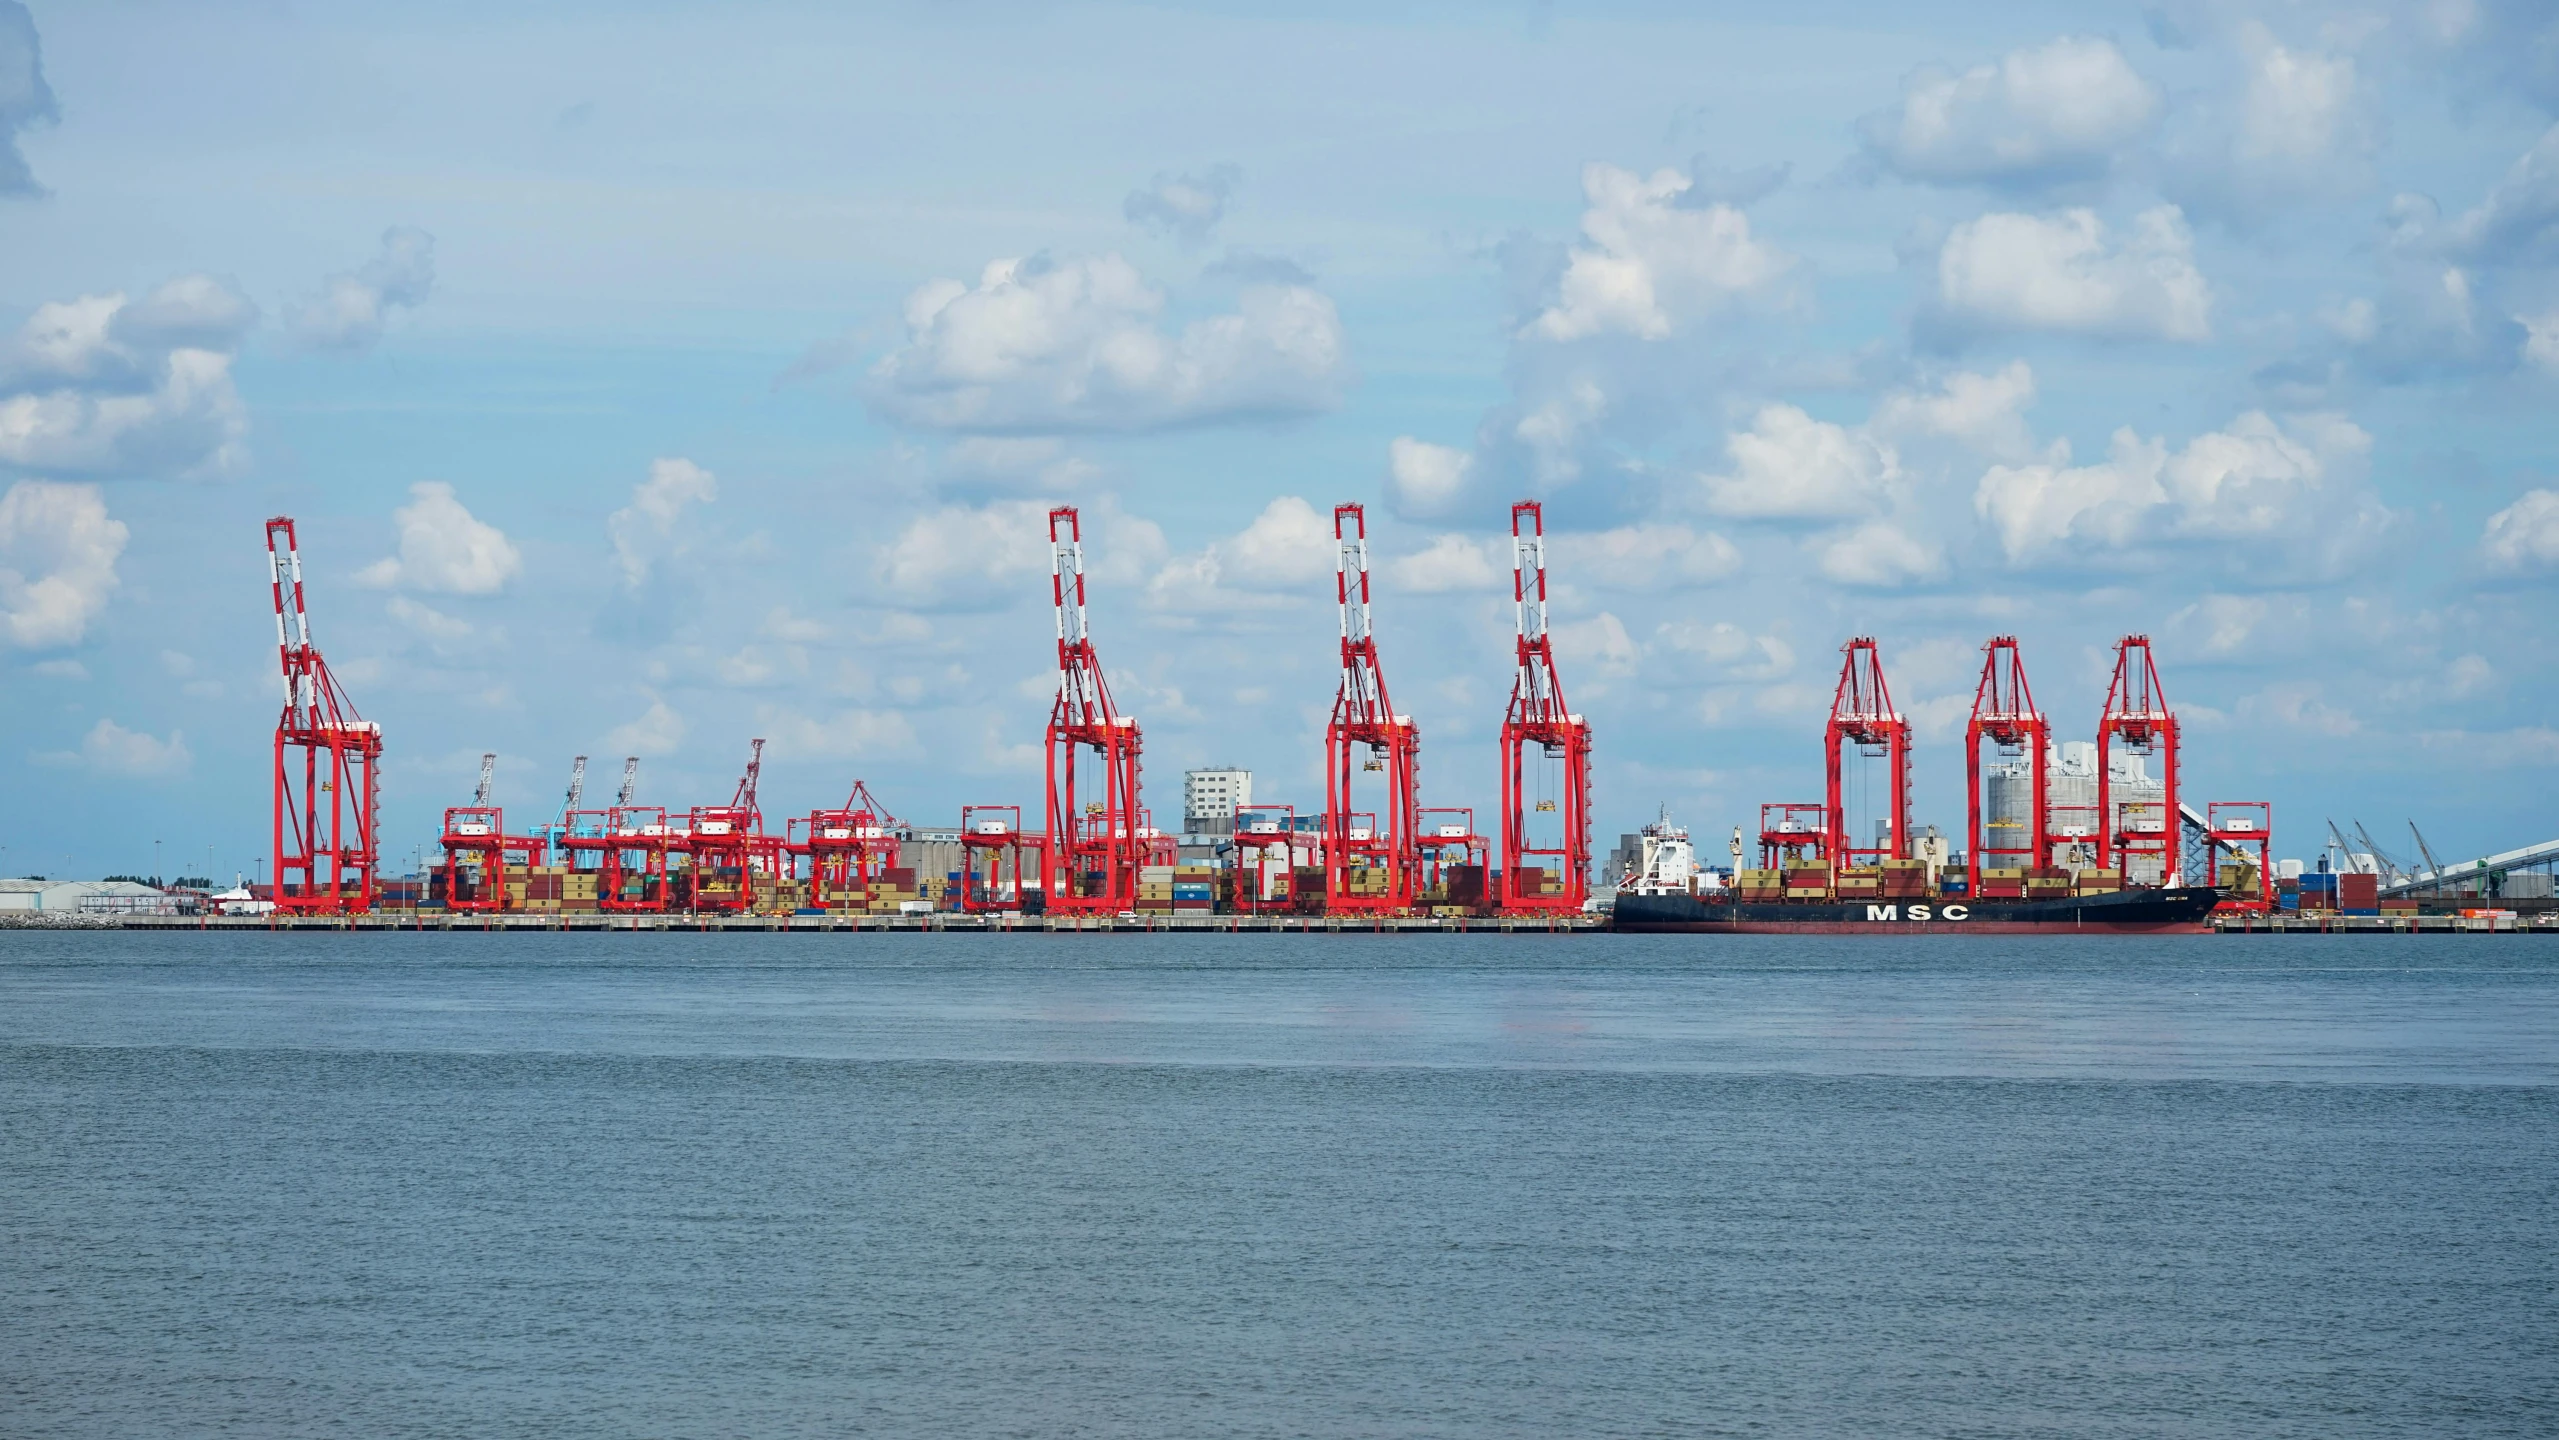 red cranes in the middle of a large body of water